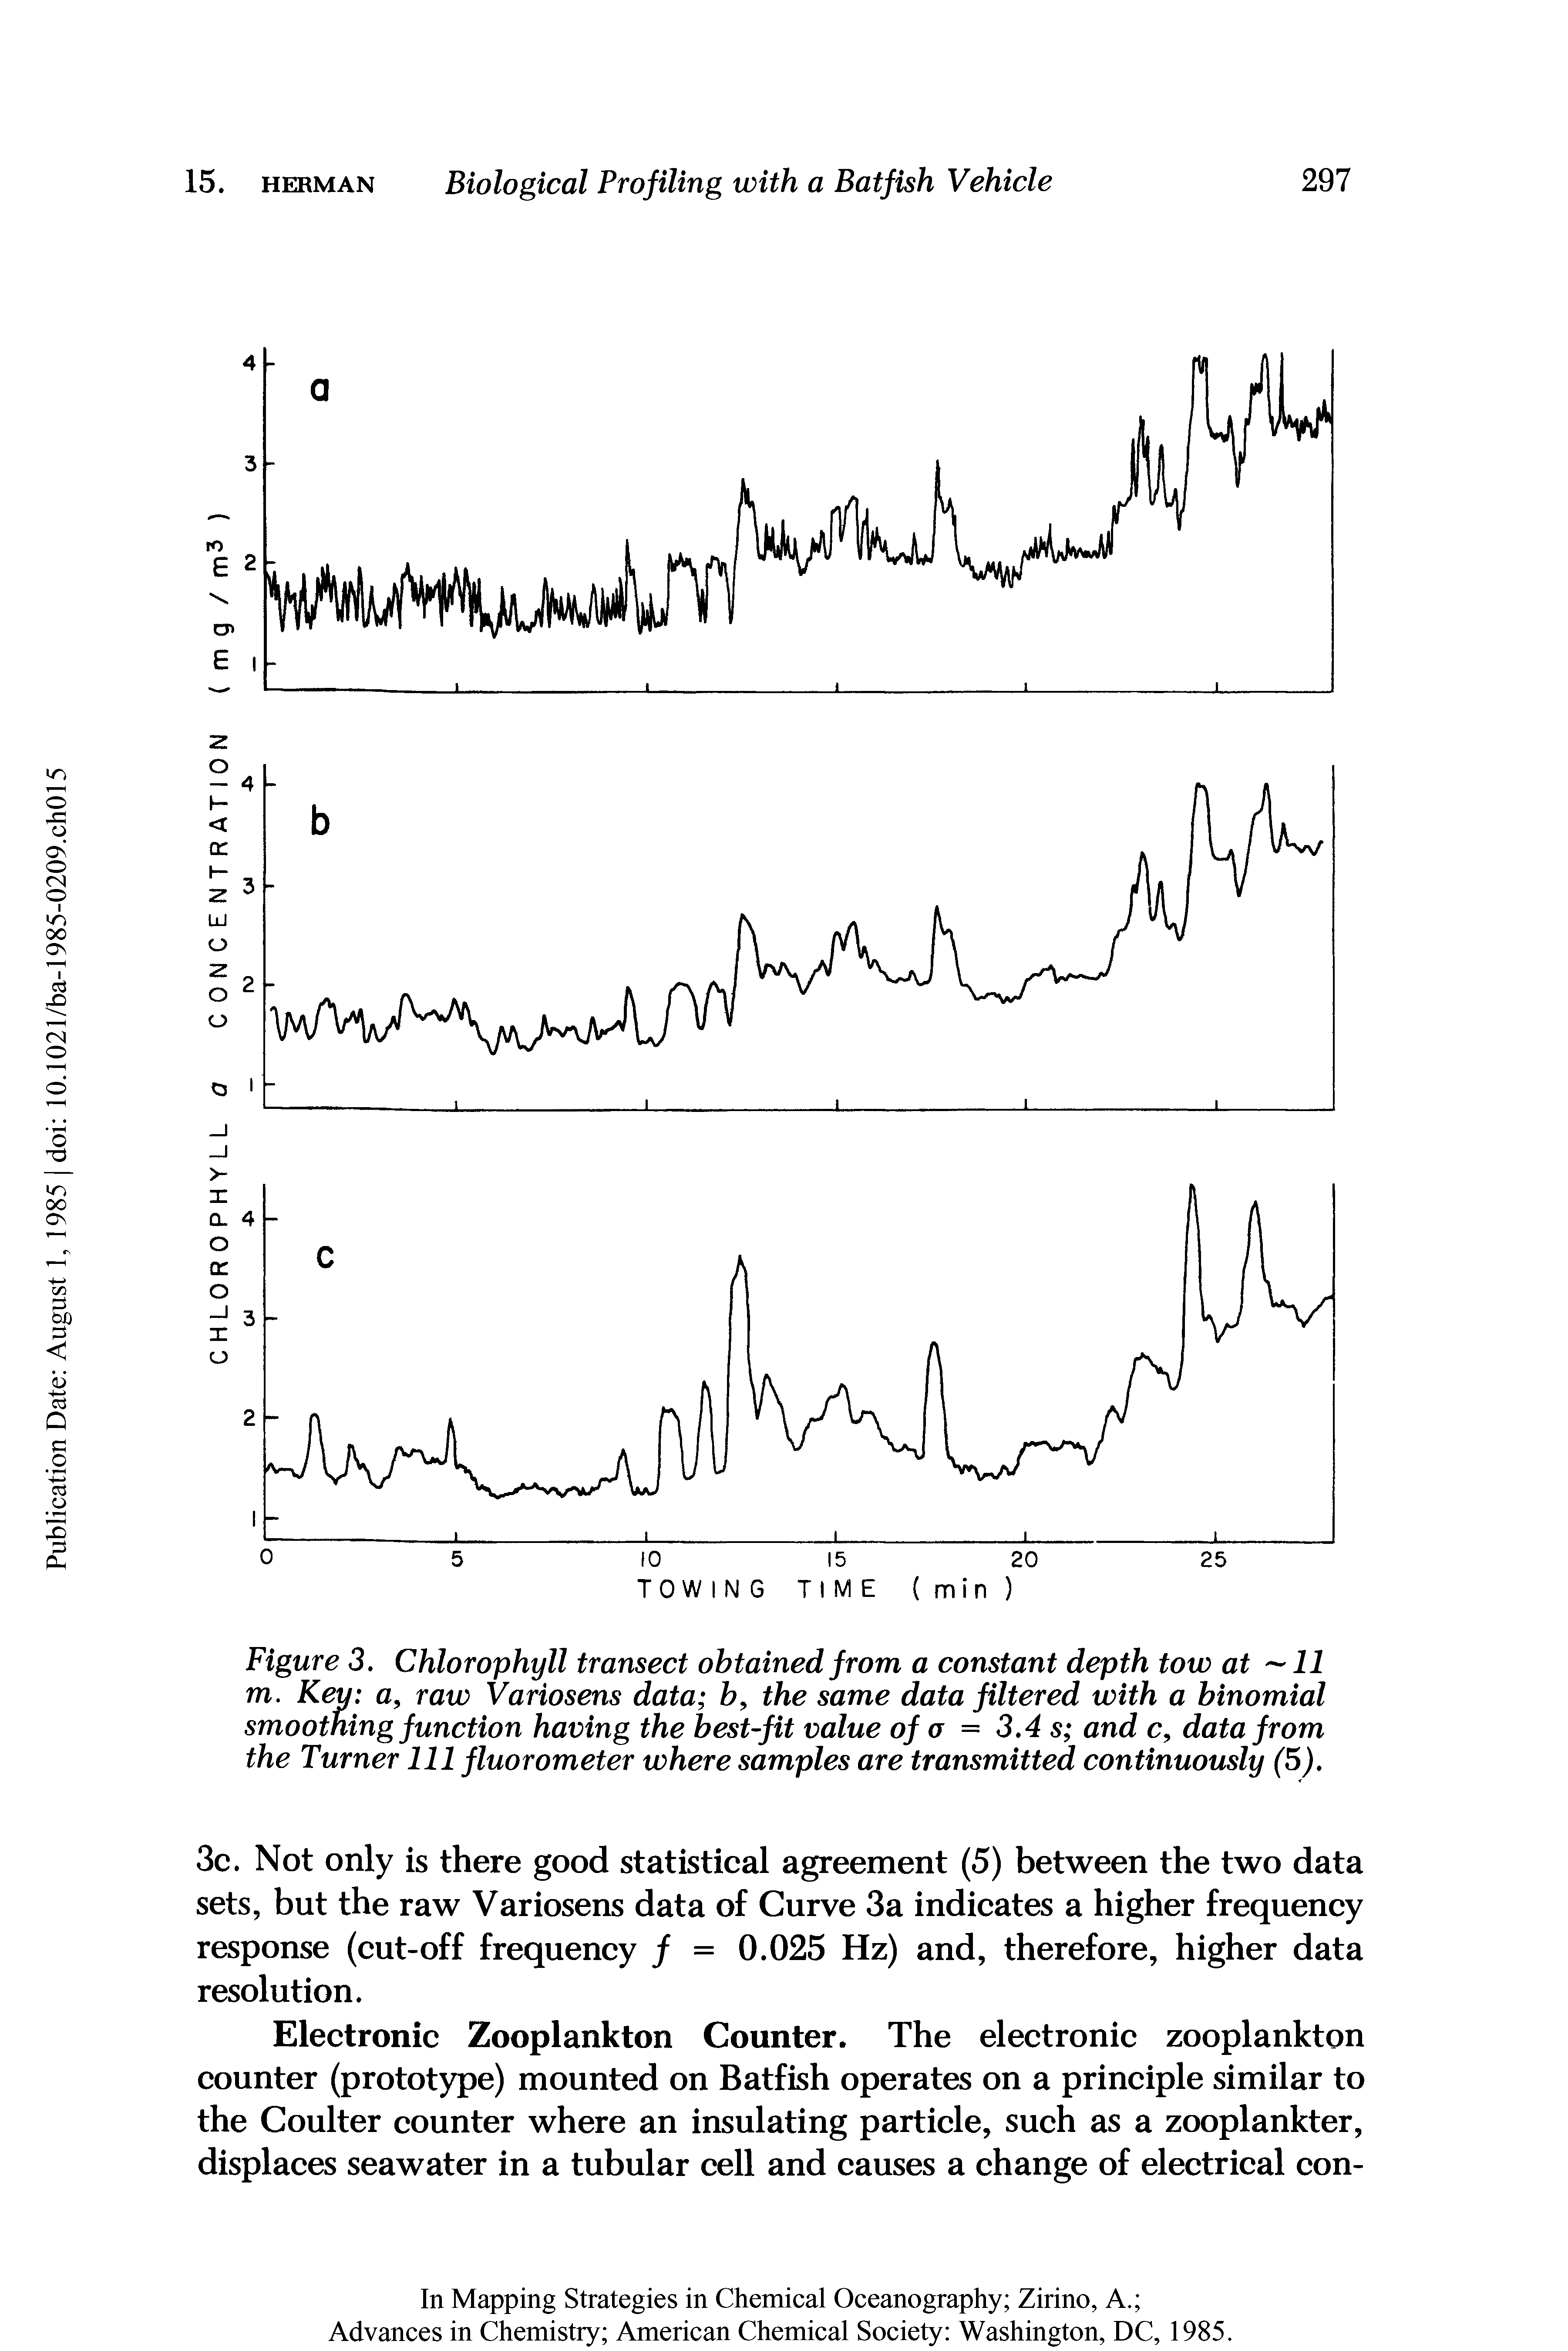 Figure 3. Chlorophyll transect obtained from a constant depth tow at 11 m. Key a, raw Variosens data b, the same data filtered with a binomial smootning function having the best-fit value of a = 3,4 s and c, data from the Turner 111 fluorometer where samples are transmitted continuously (5).